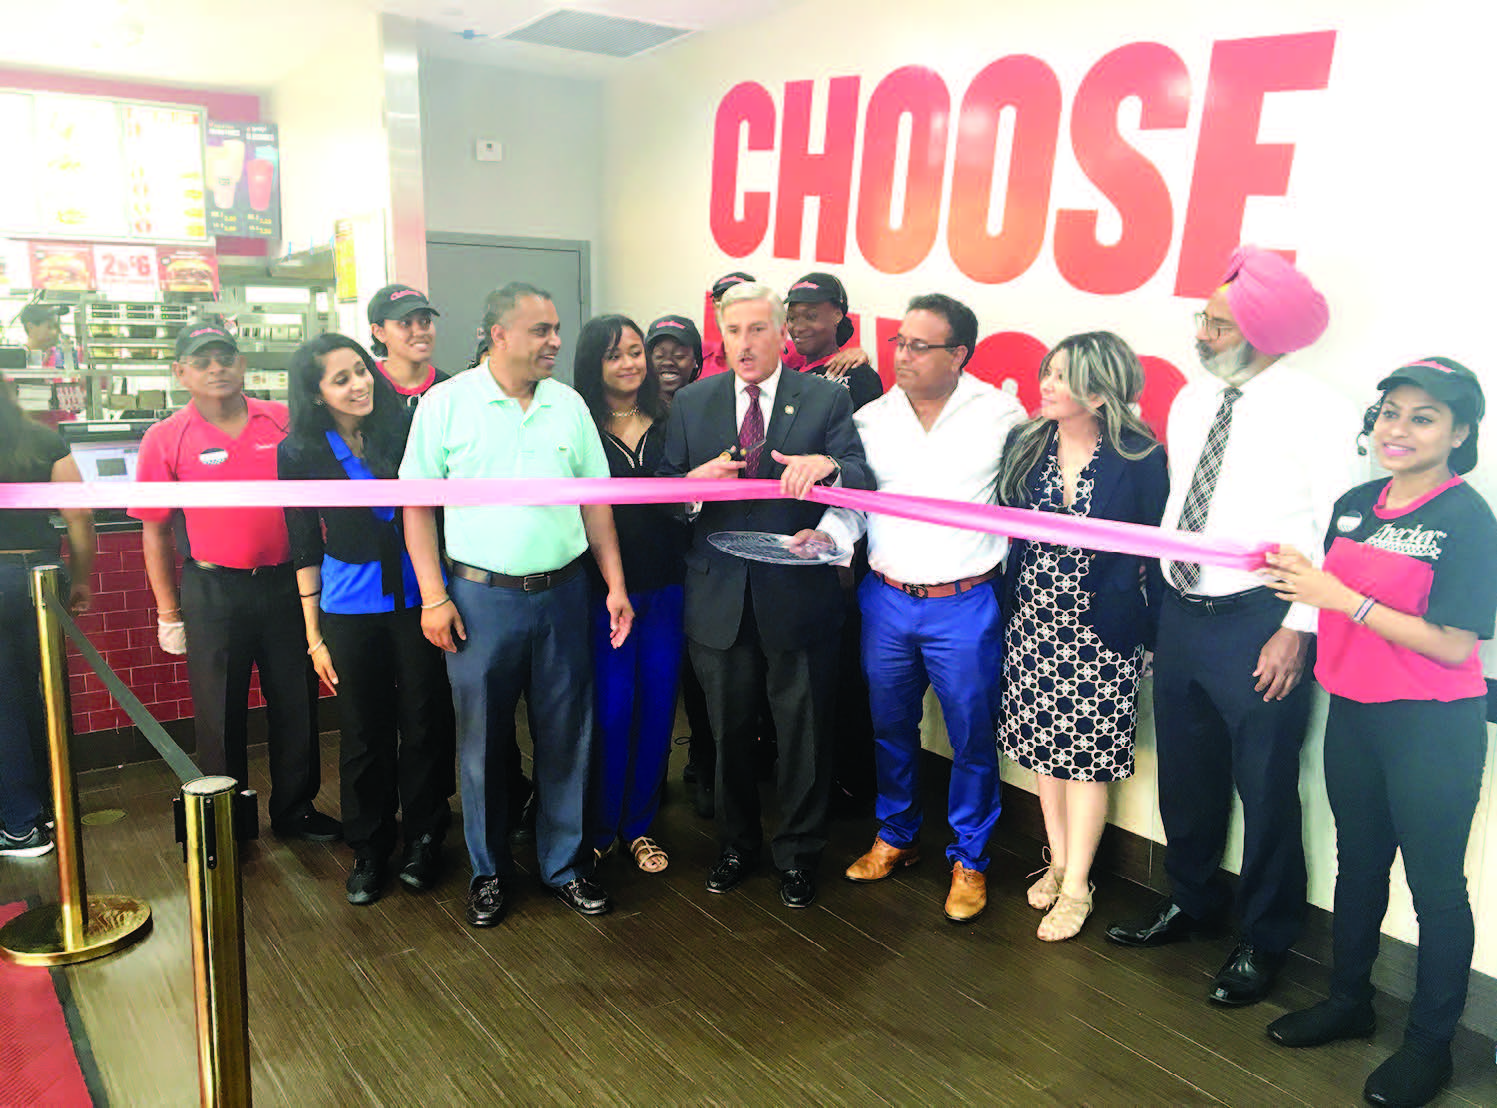 Checkers Grand Opening: Assemblyman David Weprin, partners Bhupider Singh and Manjit Singh, General Manager Monica Singh, and staff members at the grand opening of Checkers